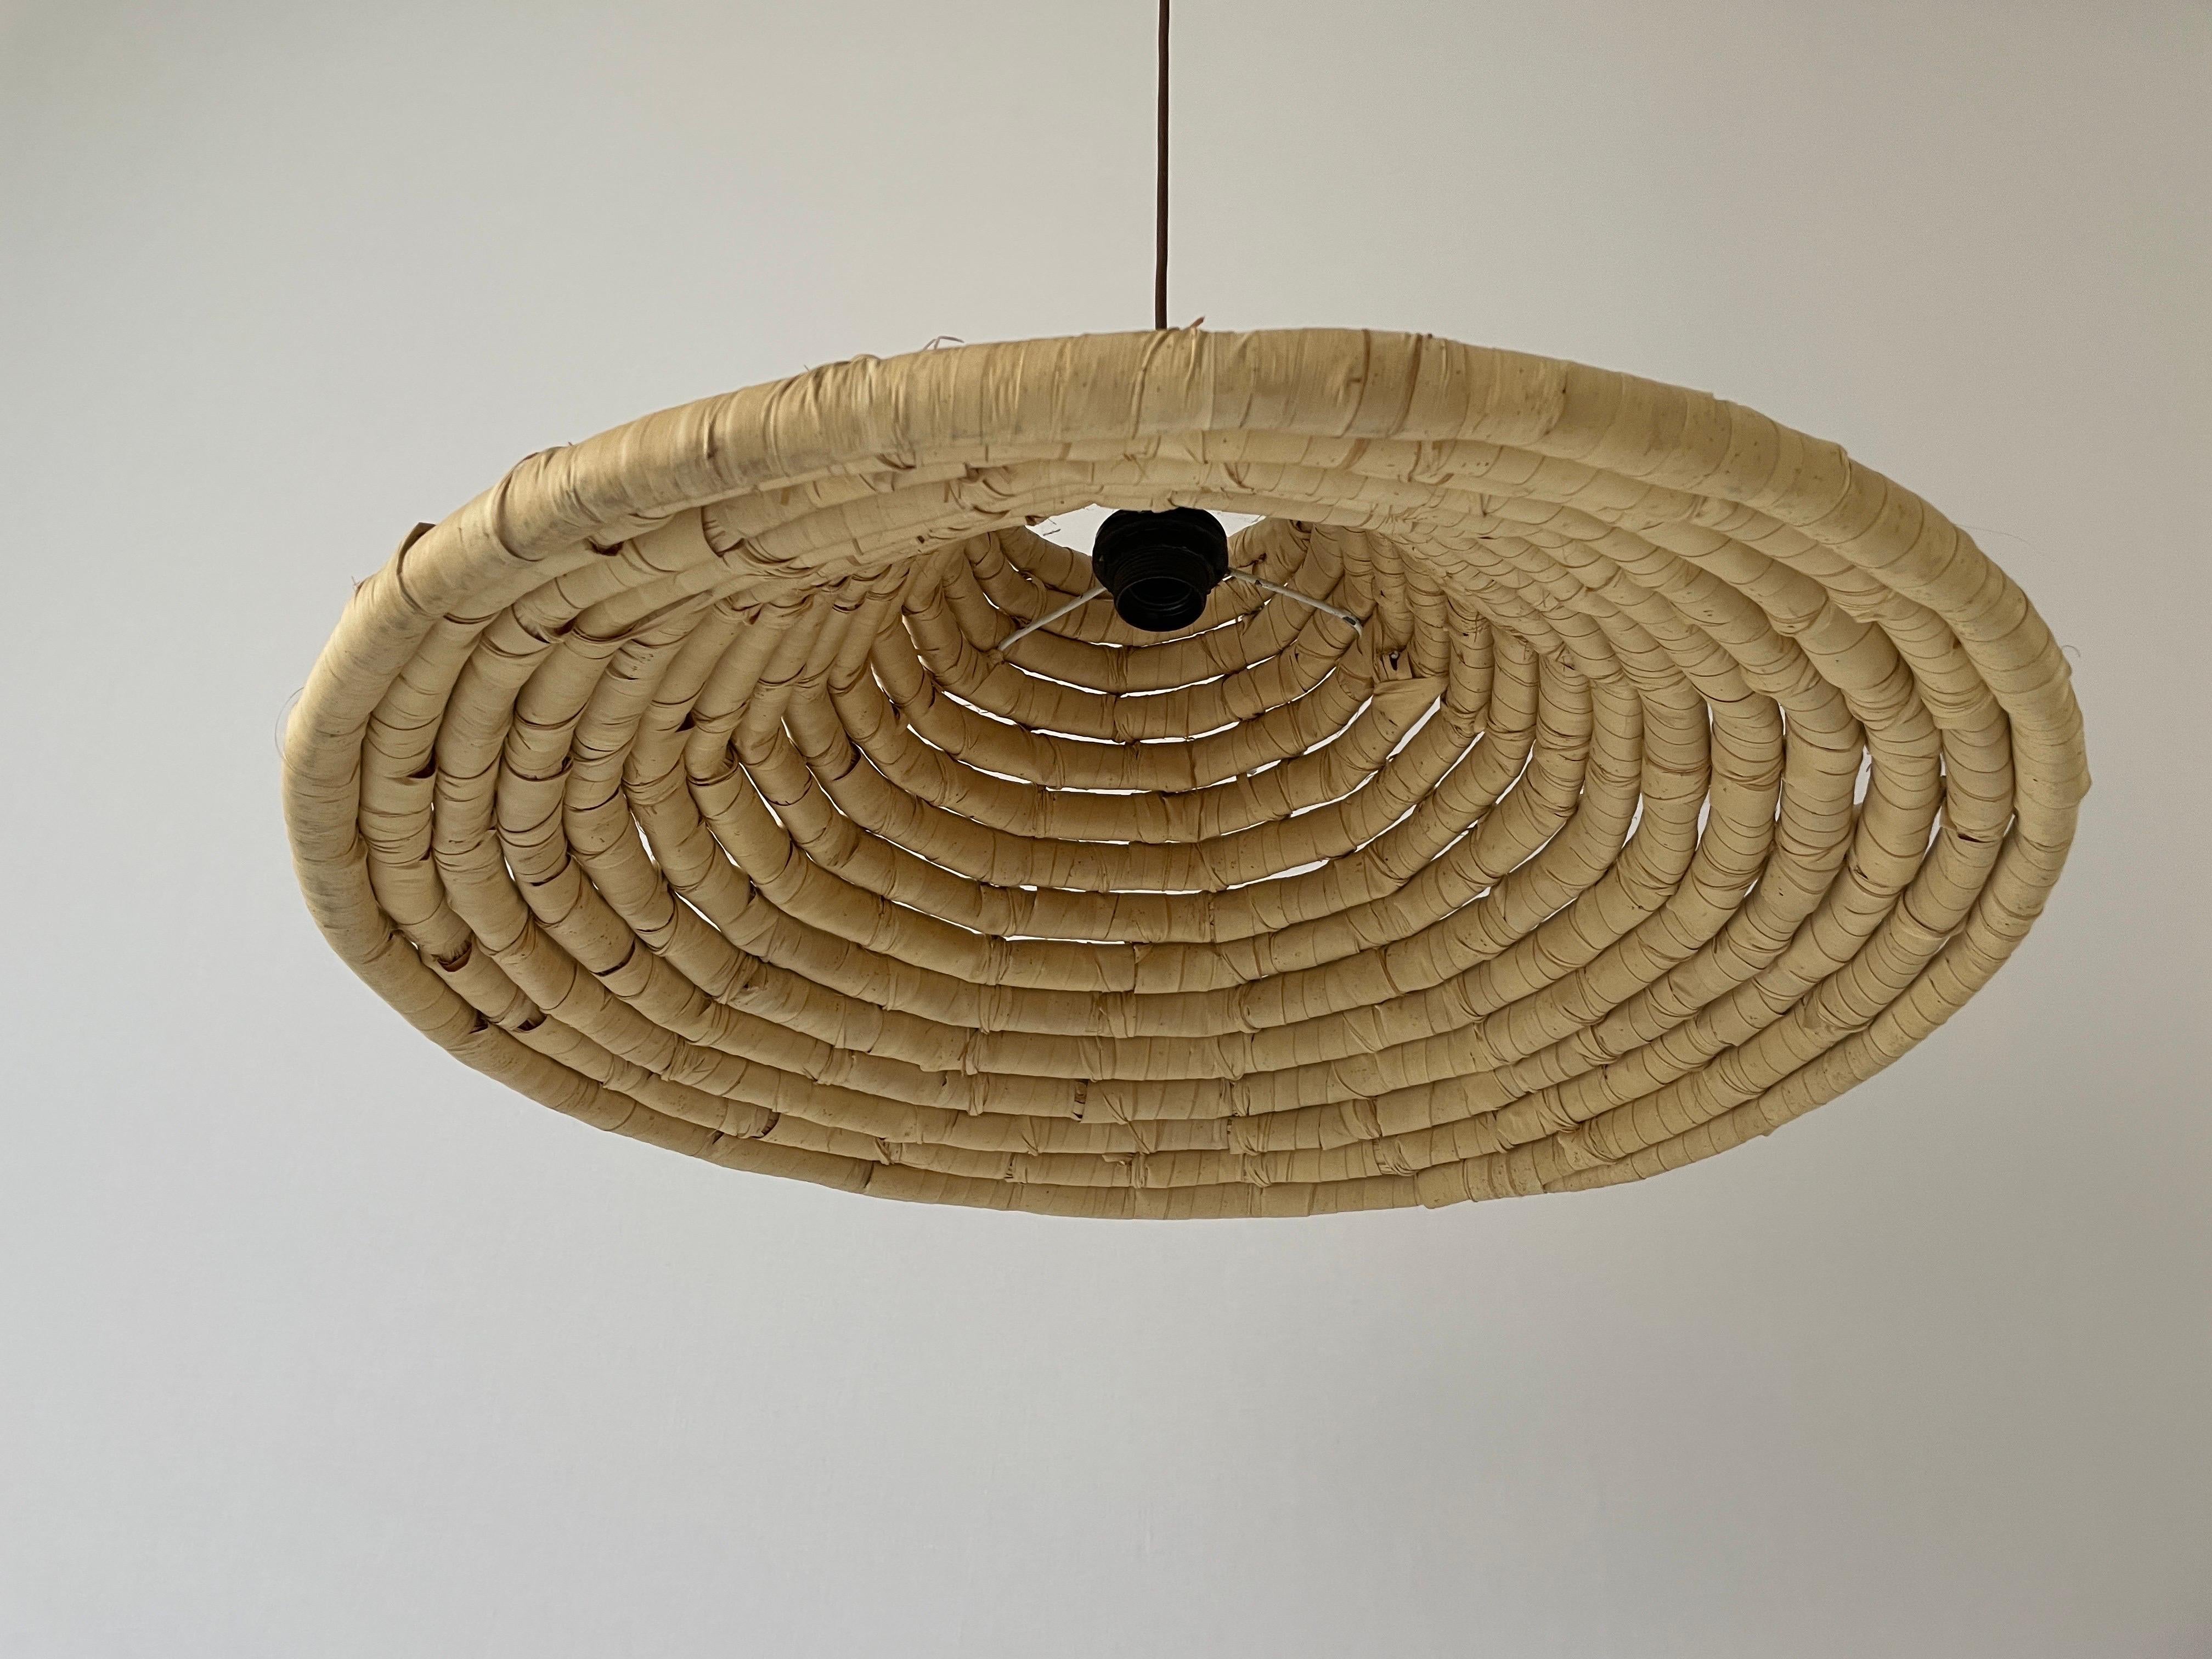 Unusual Large Made of Natural Plant Material Pendant Lamp, 1960s, Germany In Good Condition For Sale In Hagenbach, DE